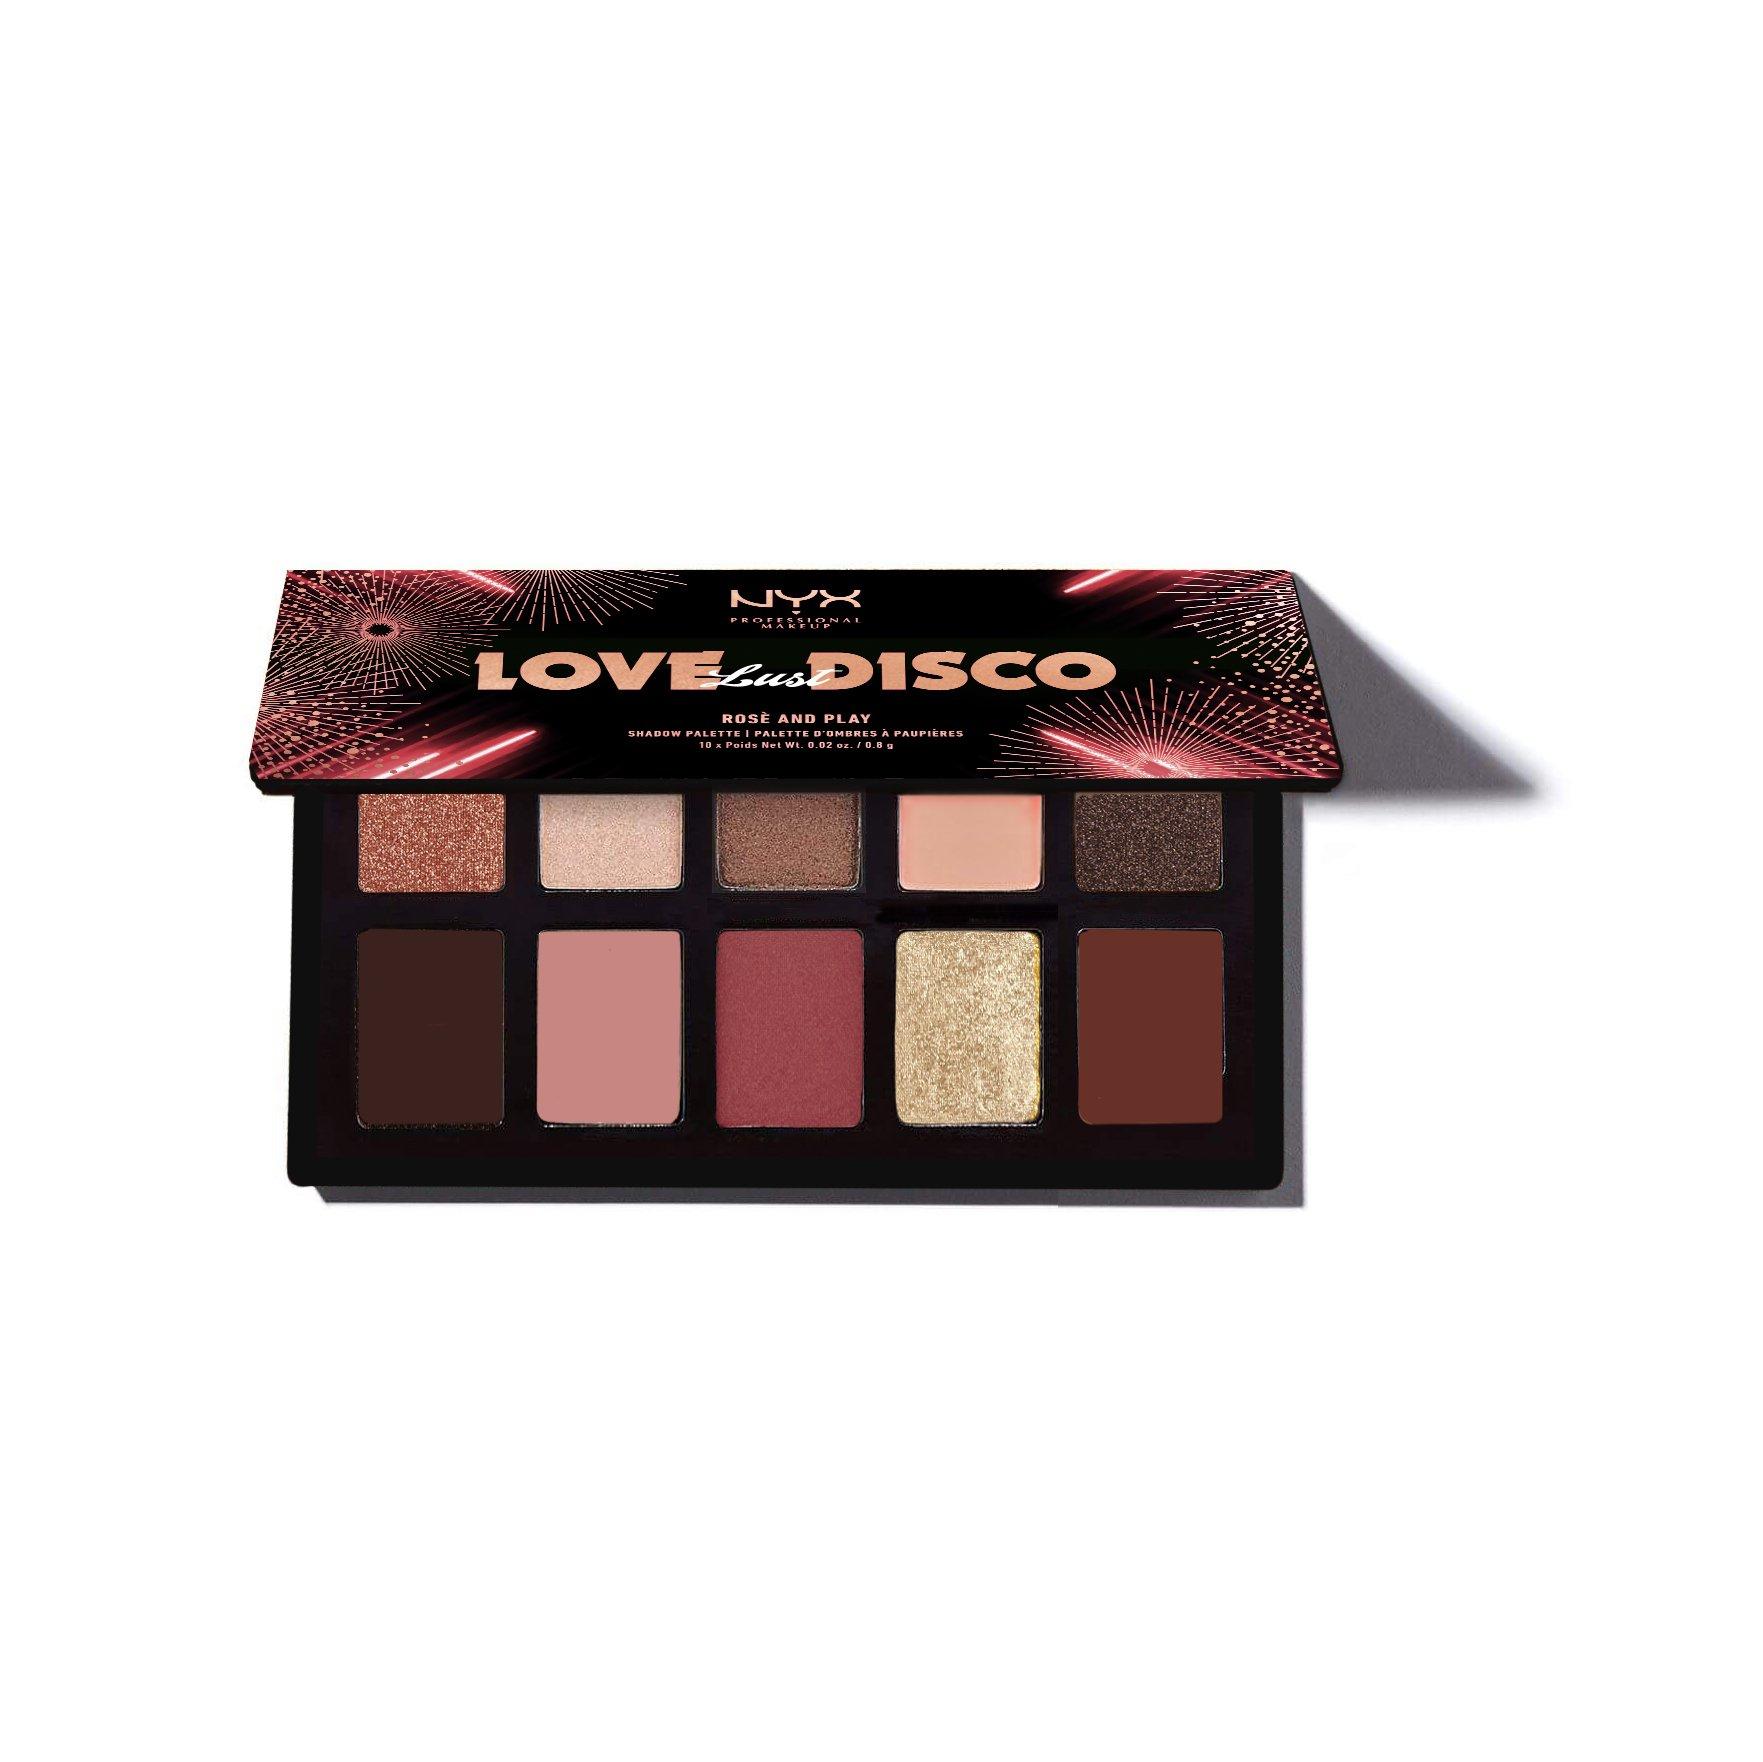 Image of NYX-PROFESSIONAL-MAKEUP Love Lust Disco Eyeshadow Palette 03